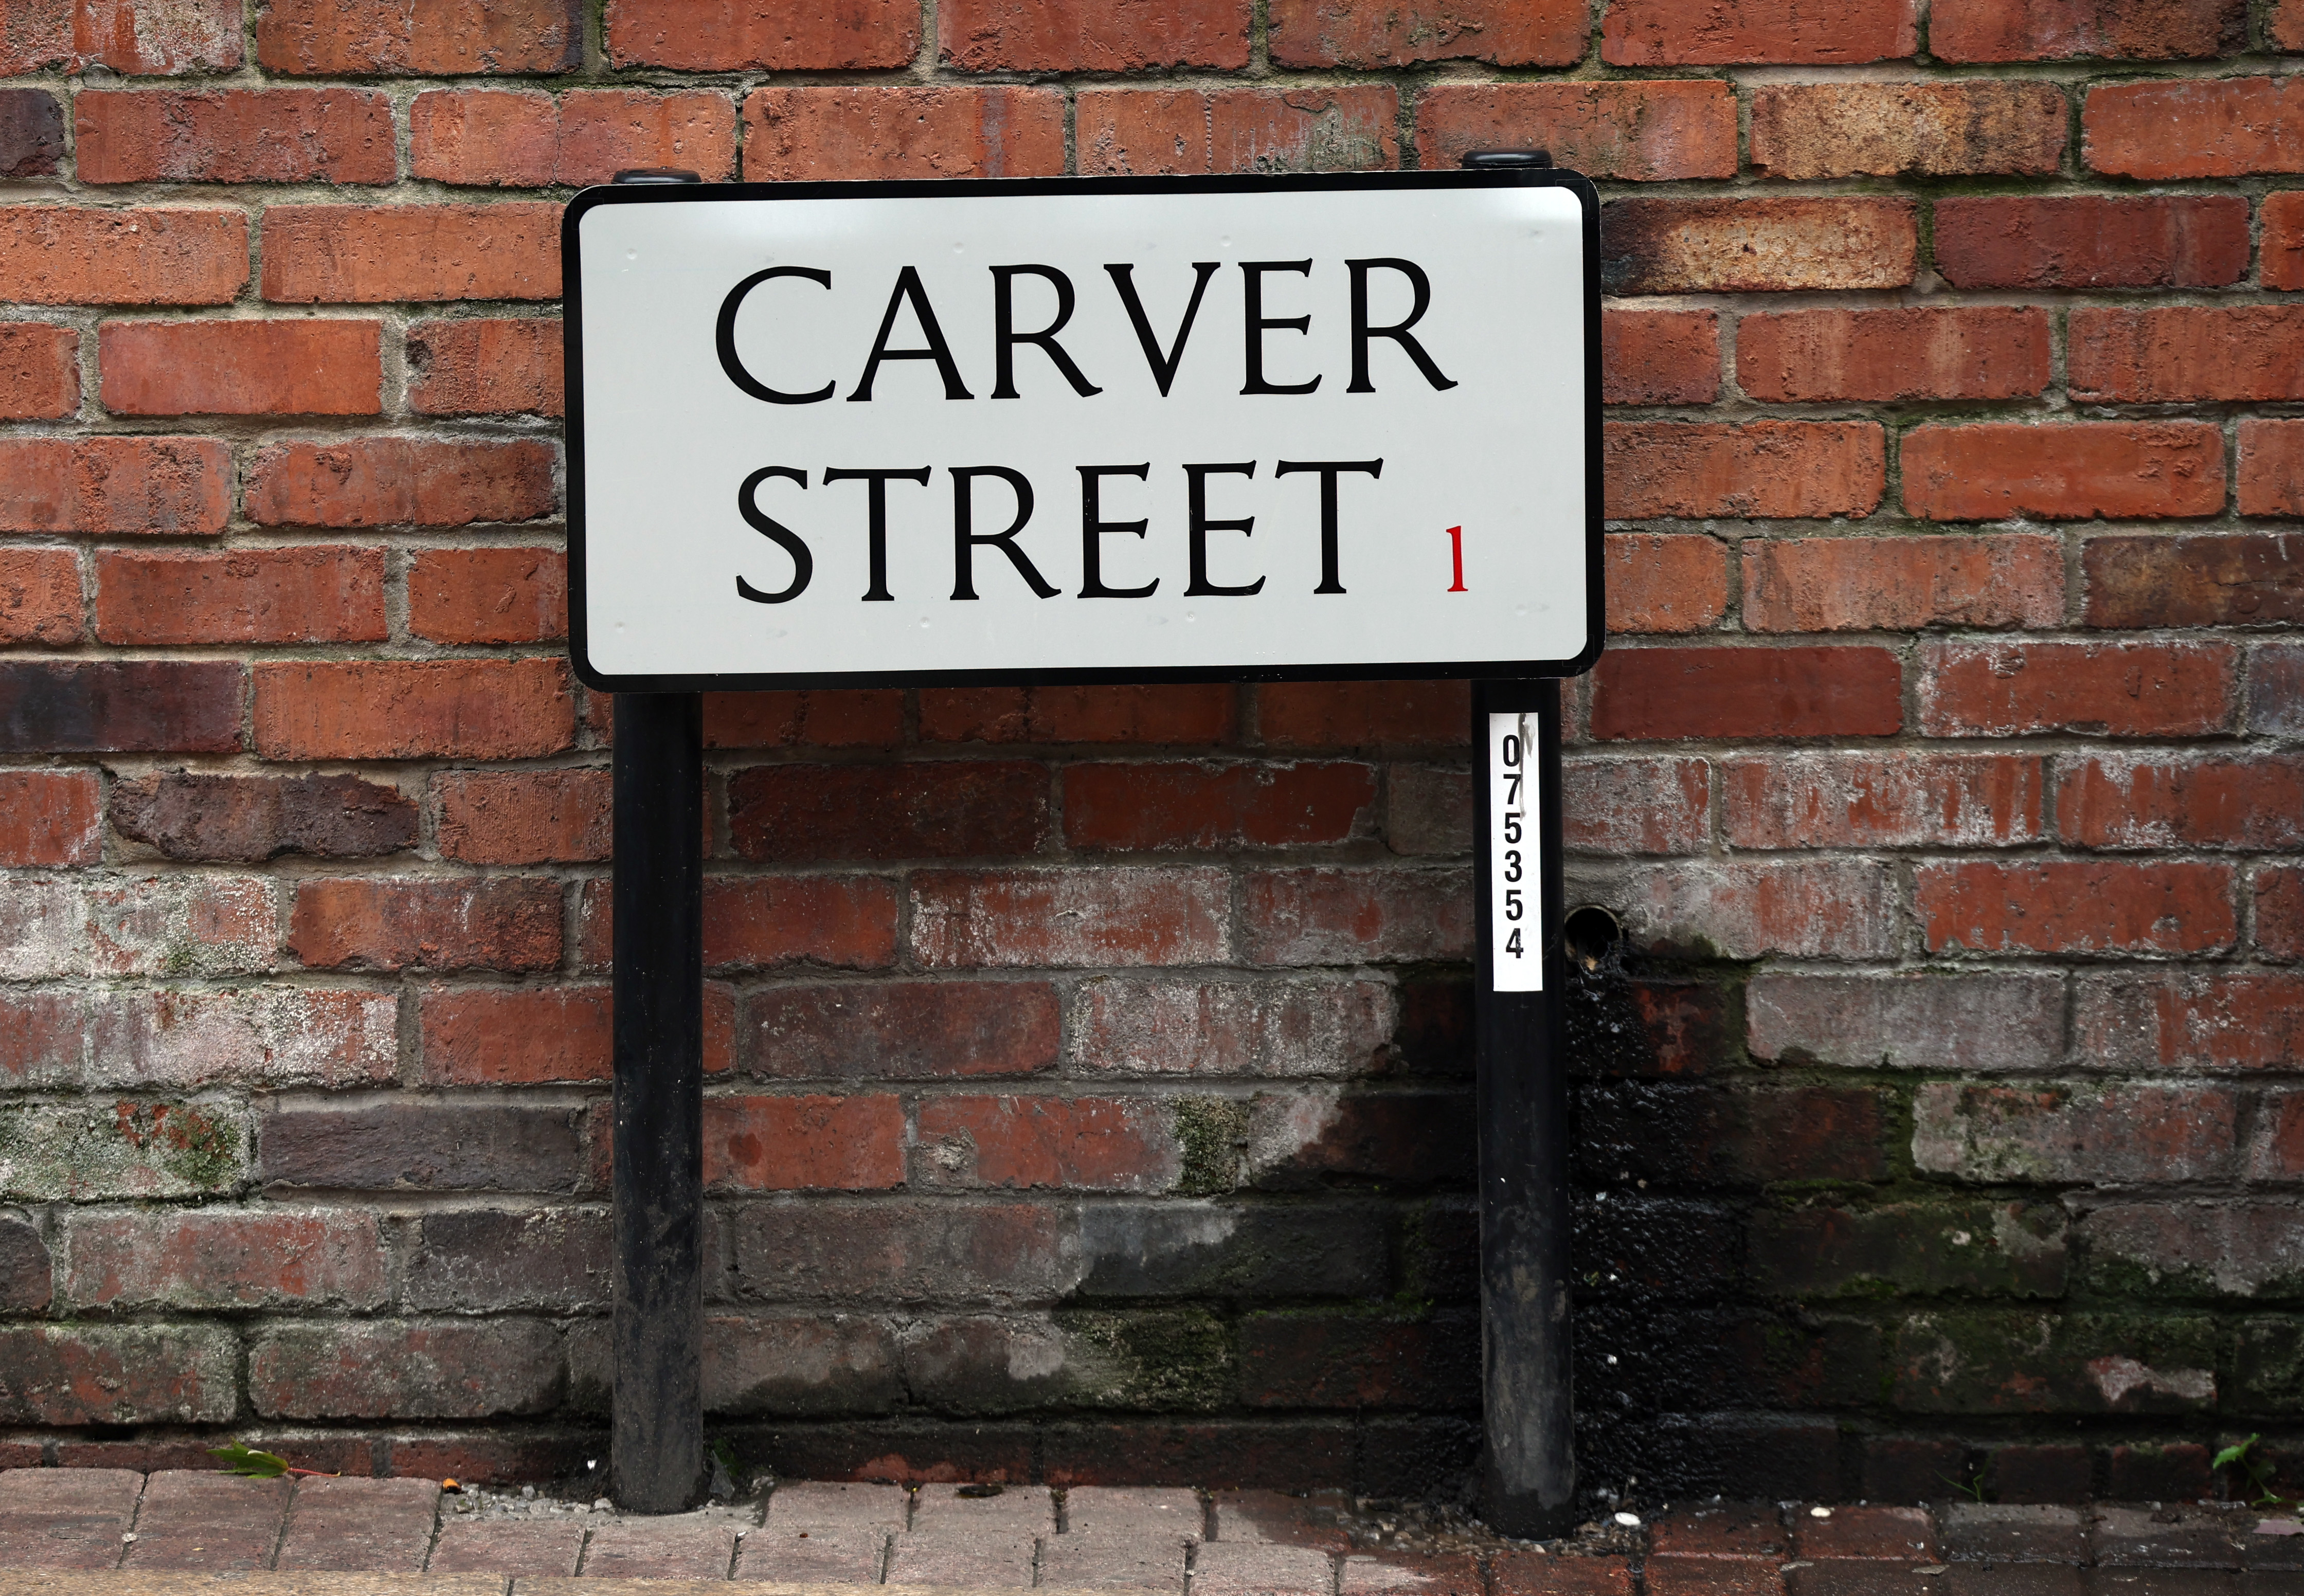 Carver Street is known by locals as 'Party Street'